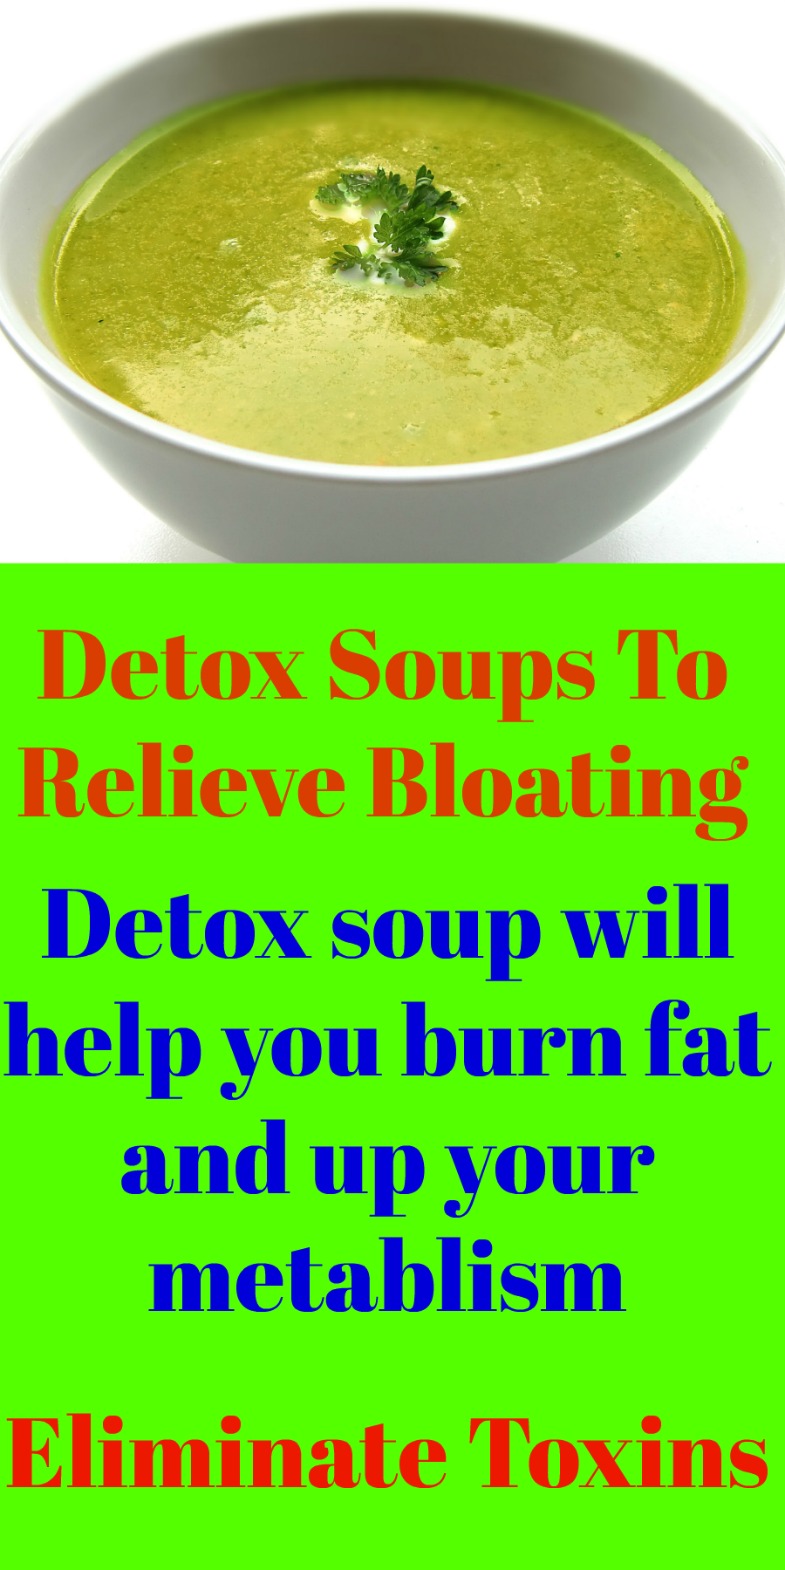 What to do when you're bloated? Sip on these 3 Detox Soups to help with bloat!! Sip on soup all day and you will lose that dreaded bloat from carrying too much waste inside your belly. 